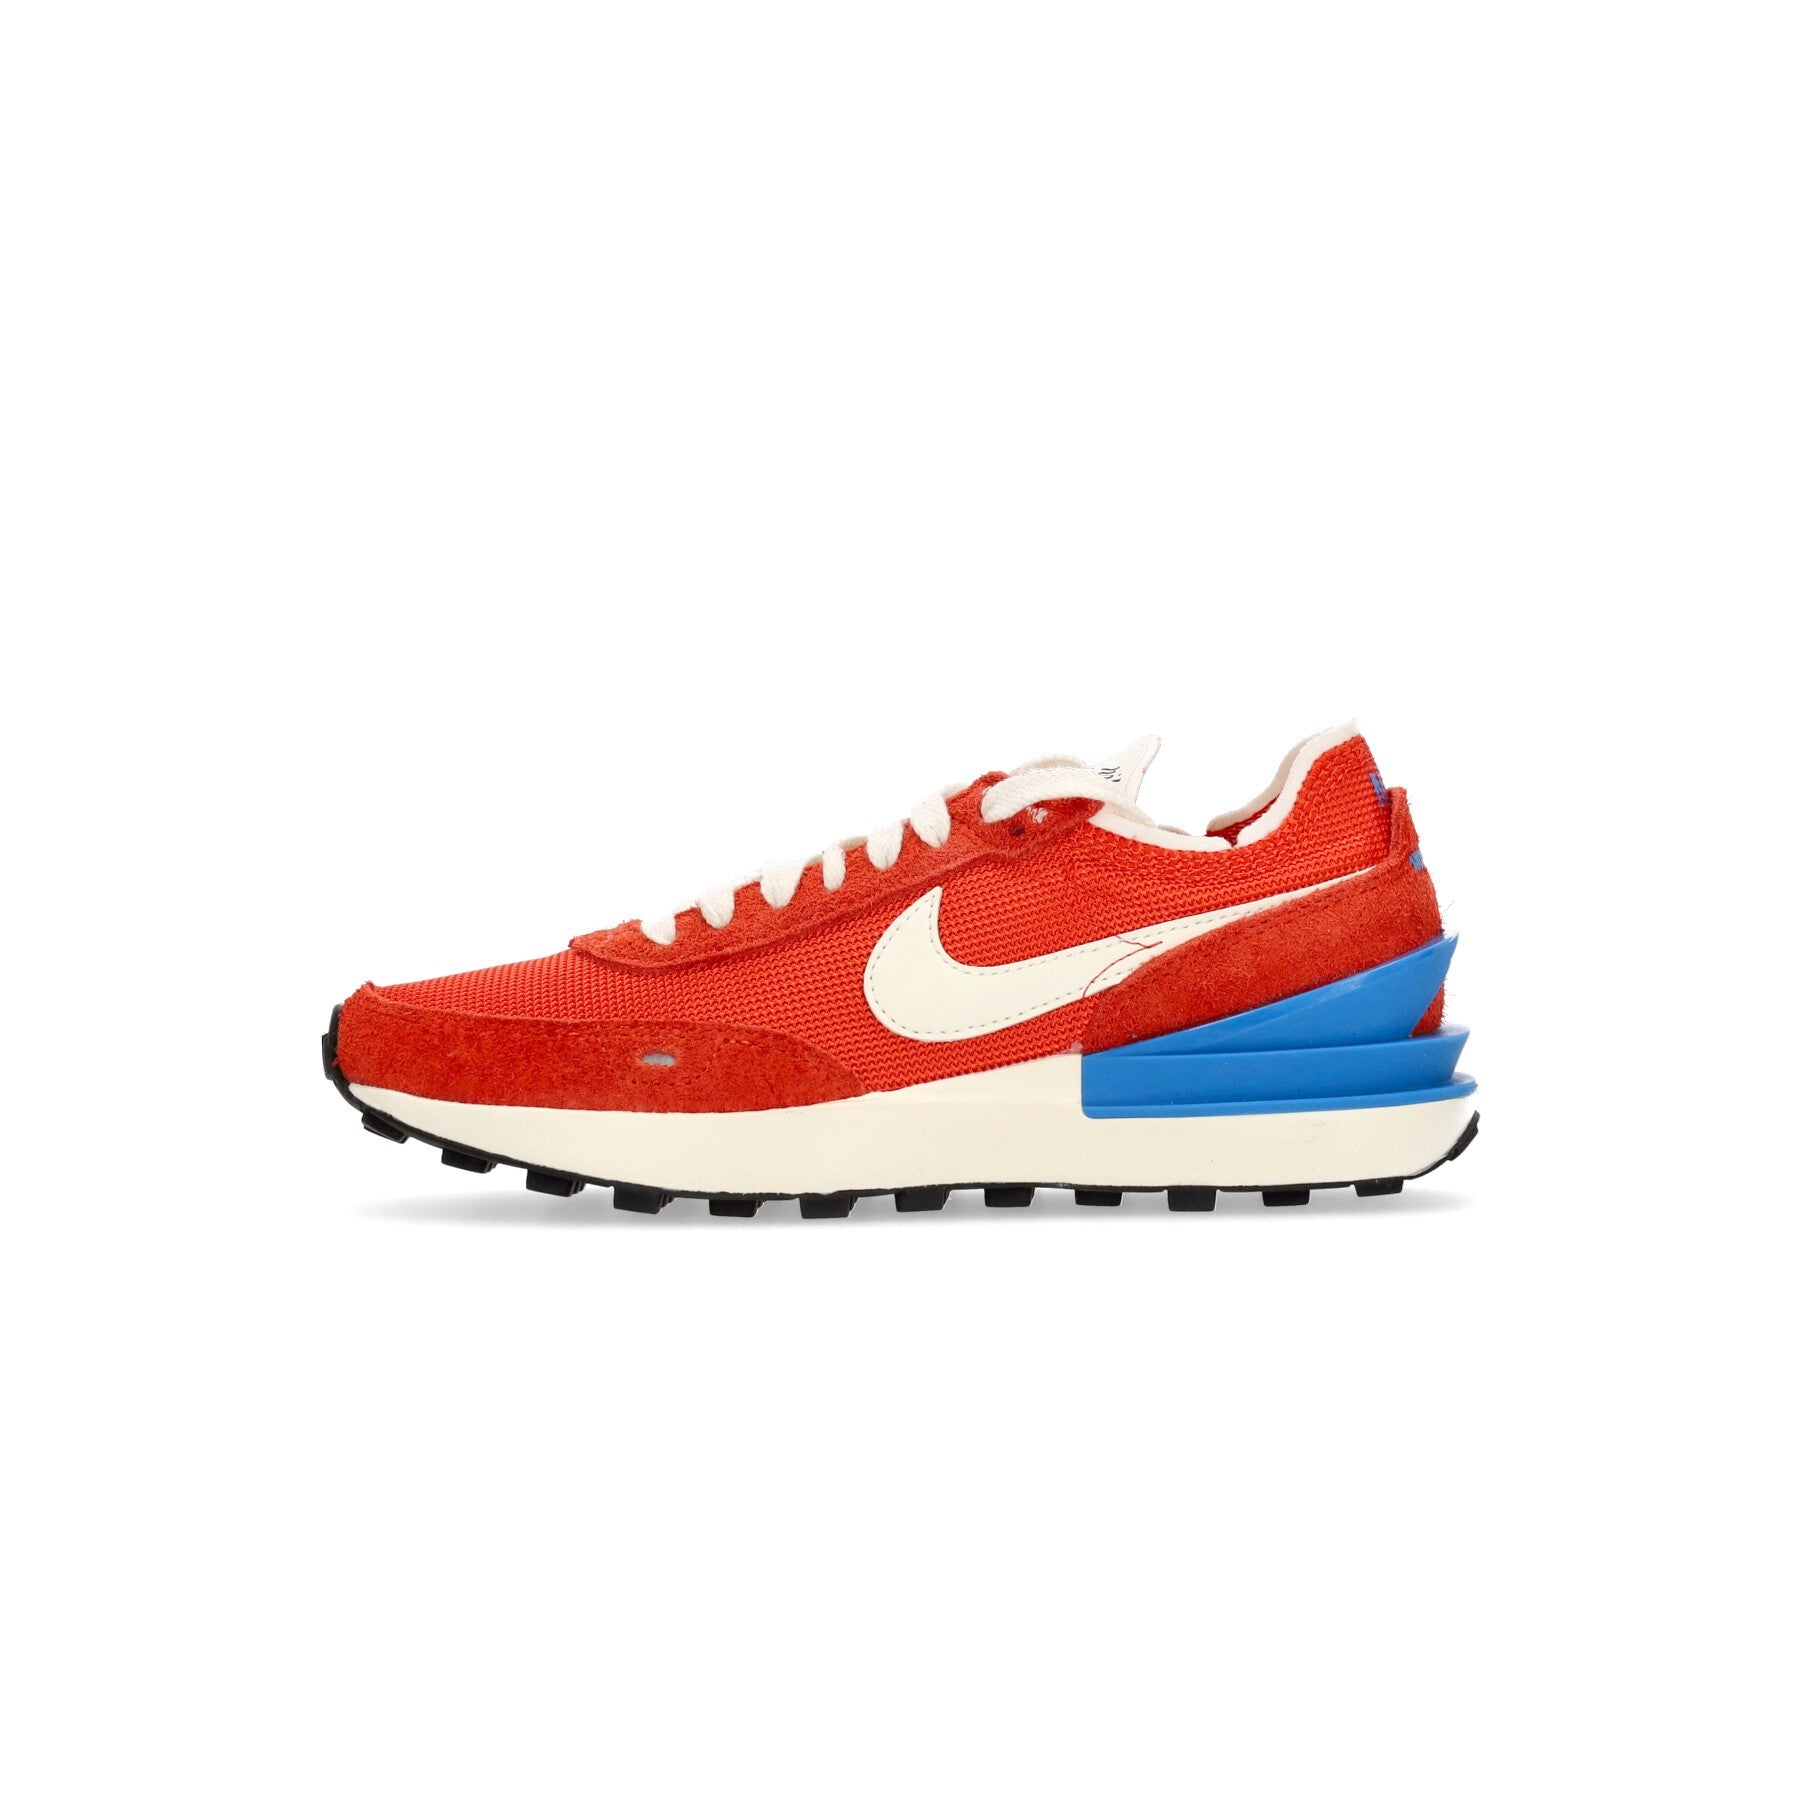 Nike, Scarpa Bassa Donna W Waffle One Vintage, Picante Red/sail/lt Photo Blue